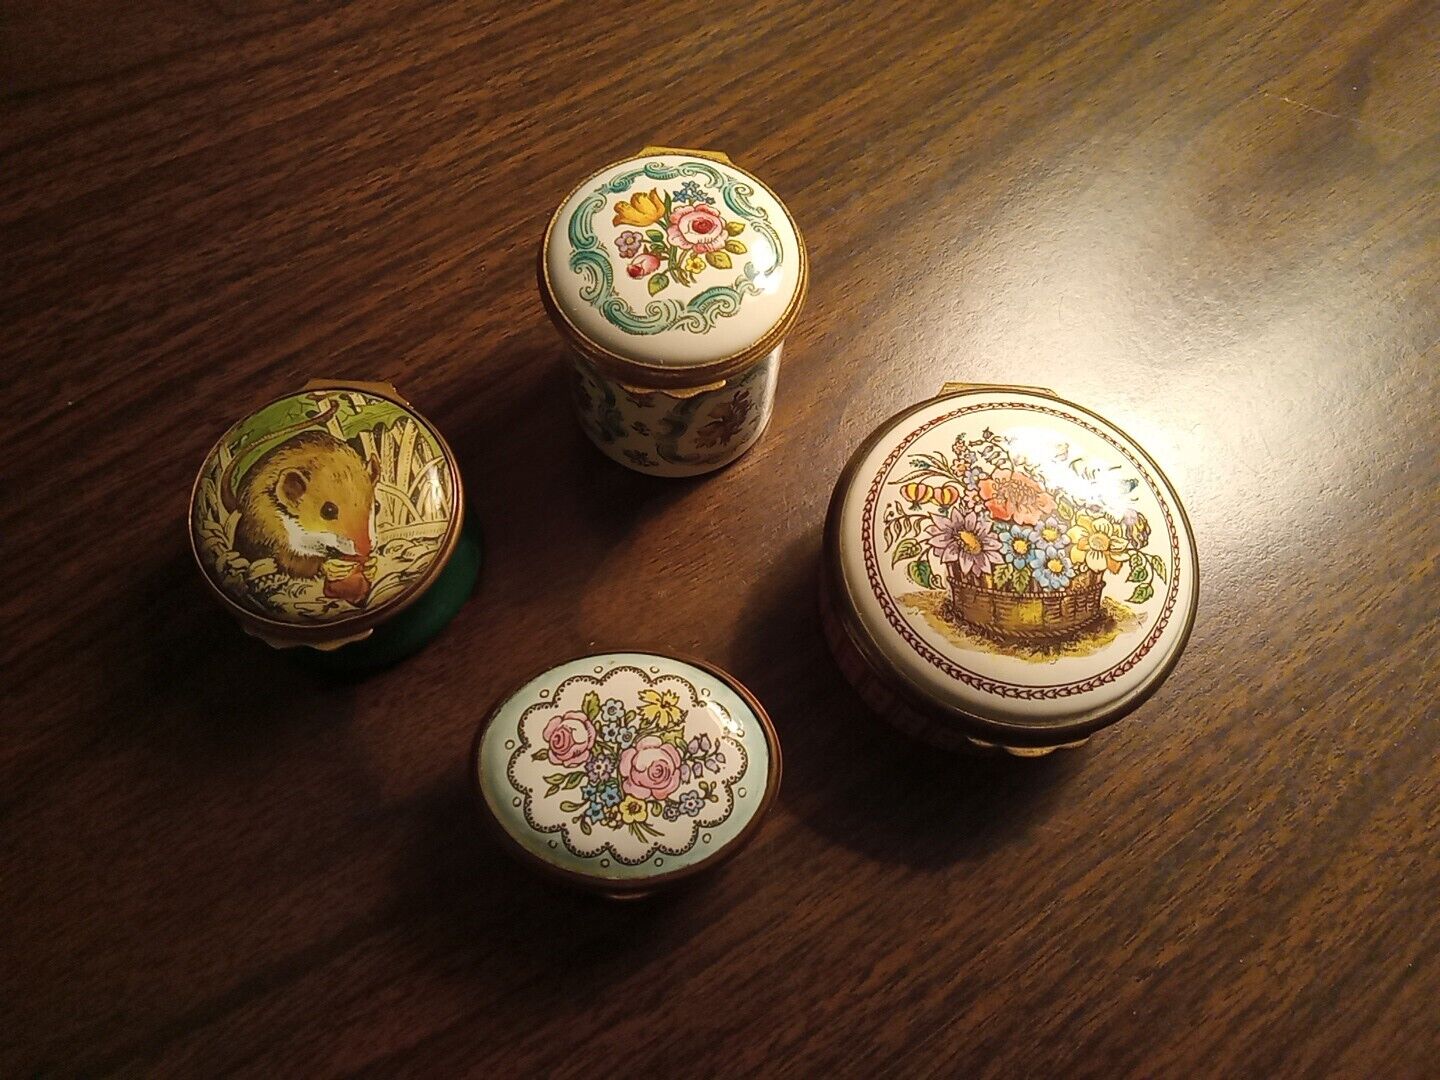 Lot/4 ~ Vintage BILSTON AND BATTERSEA Enamels Pill/Trinket Boxes - Very Nice